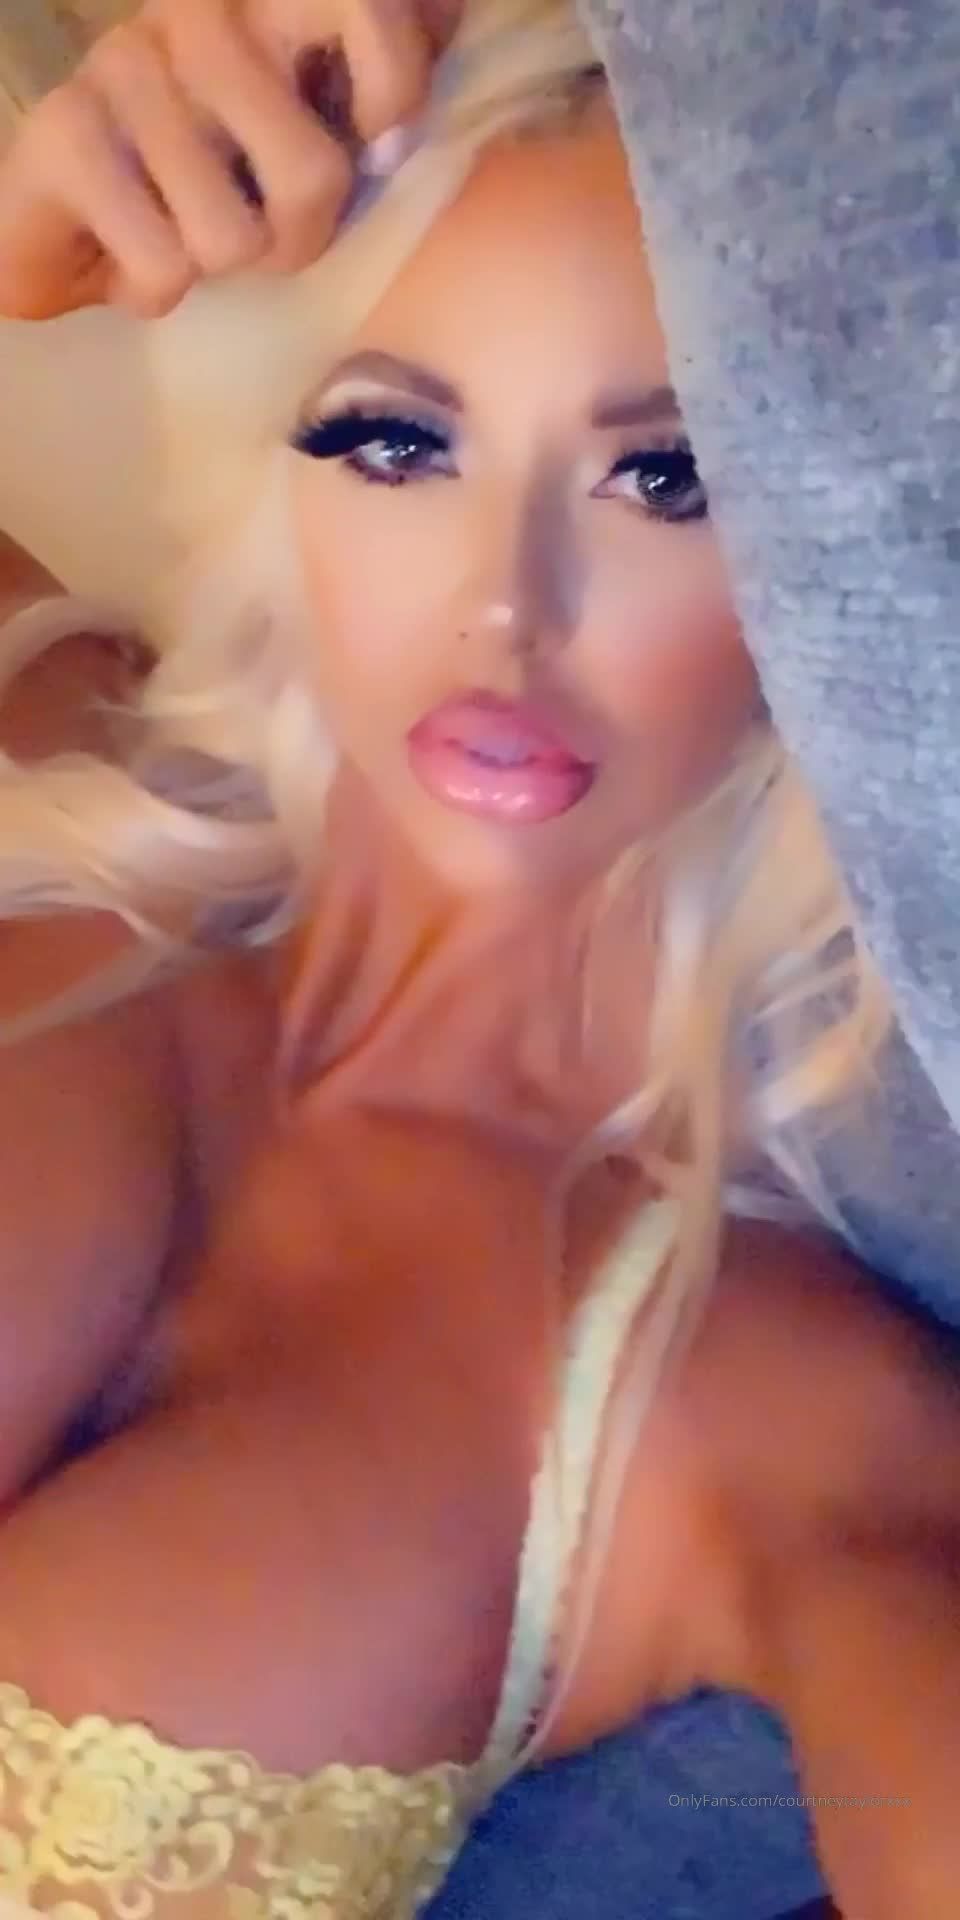 Courtney Taylor I Said Put It In My Mouth Onlyfans Hd bigtits 